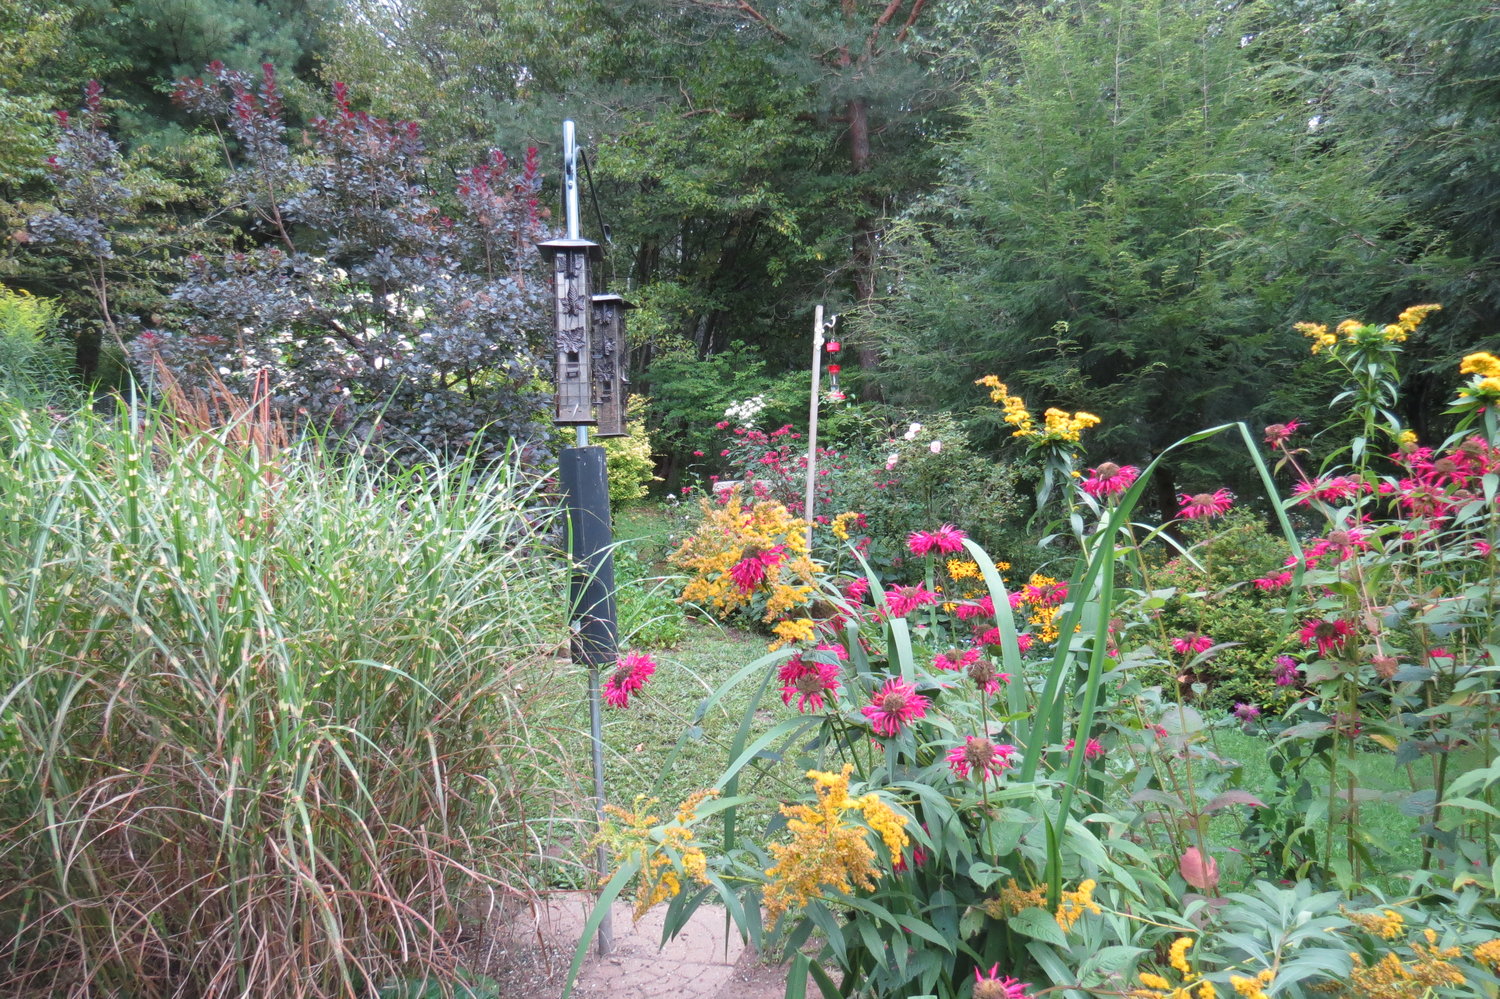 This garden is designed with birds in mind: a feeder surrounded by native plants like beebalm and goldenrod.